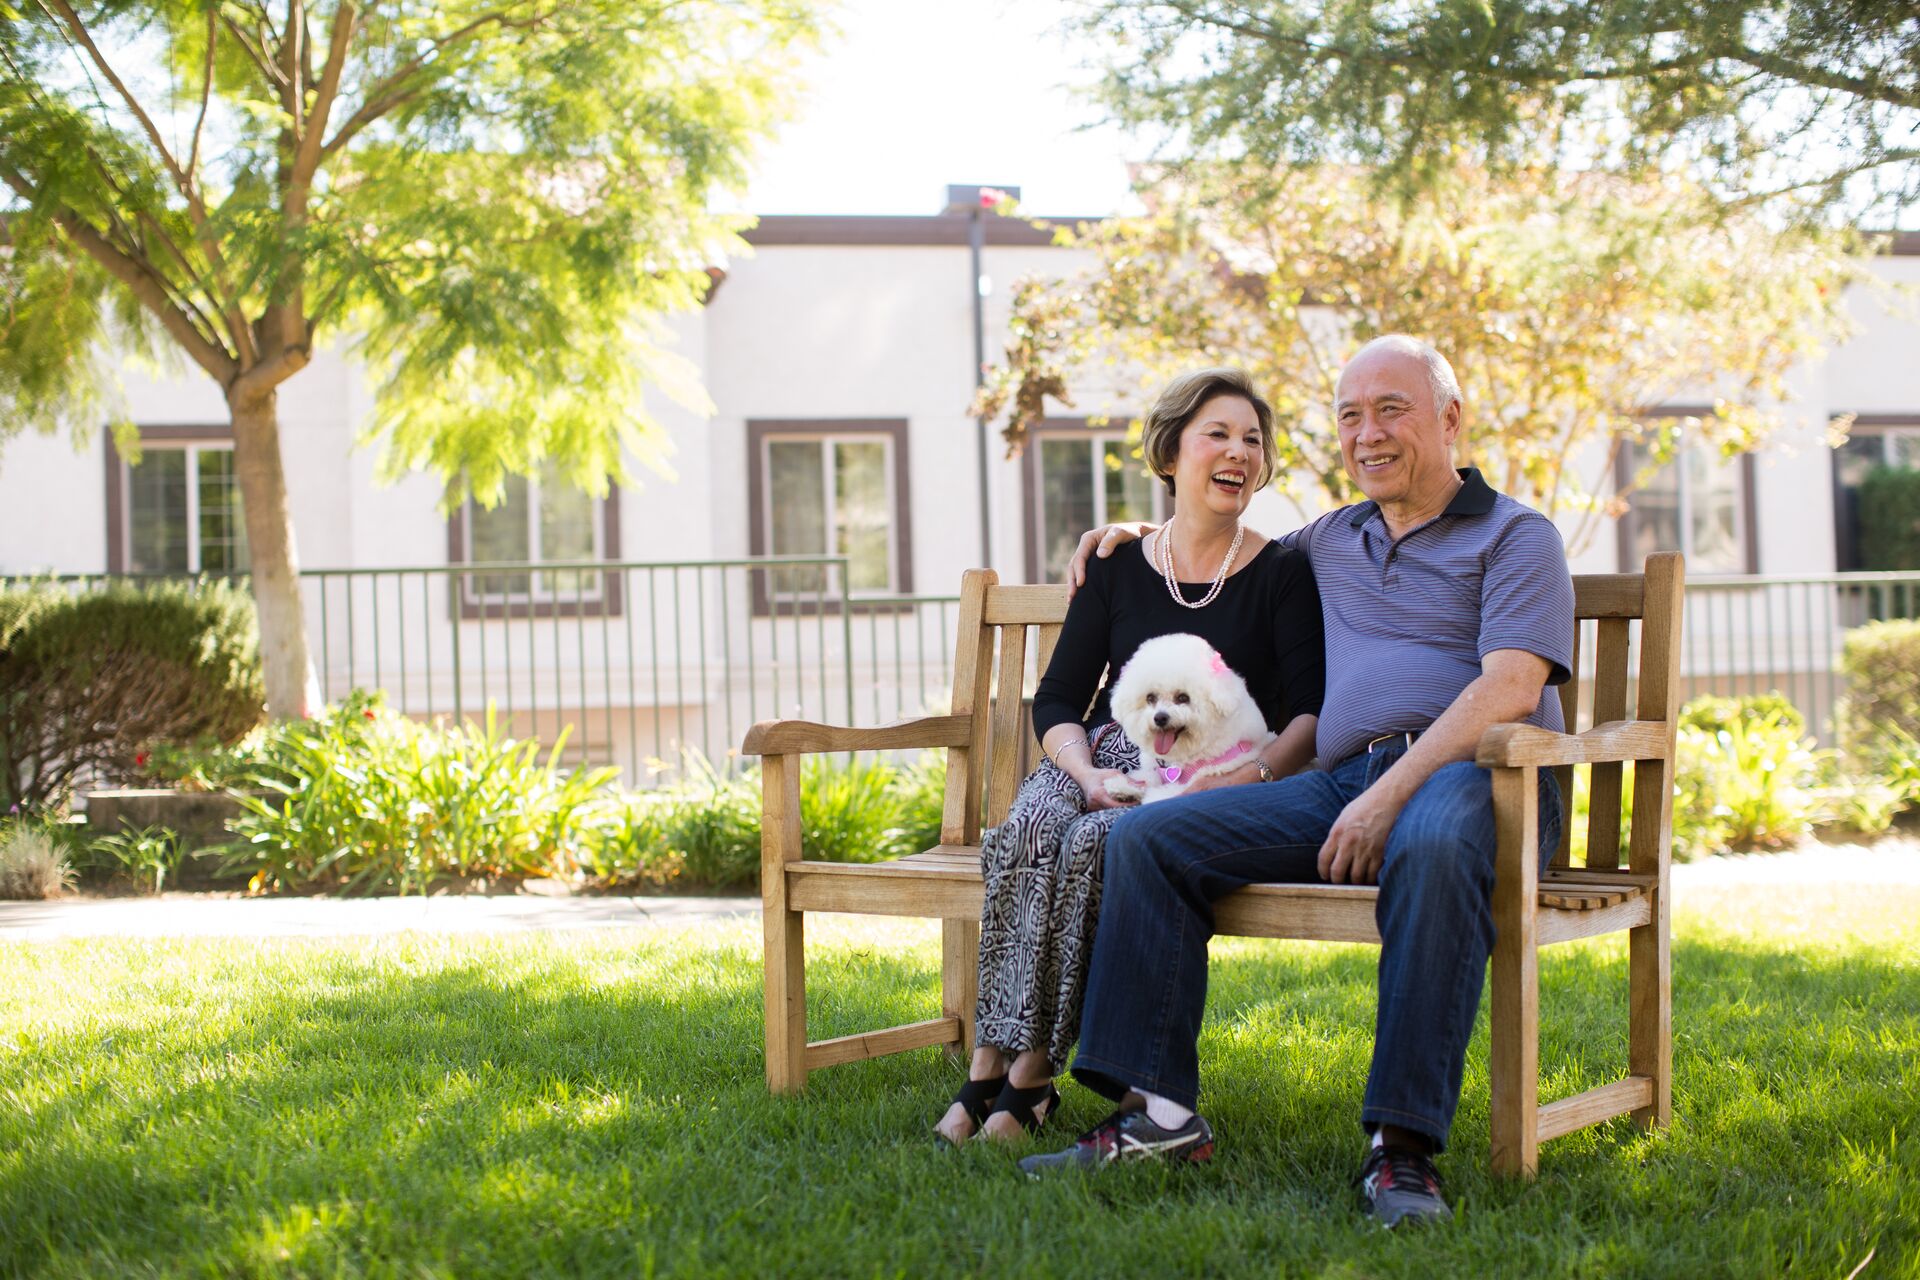 A senior couple sit on a park bench on a sunny spring day, with a small white dog on the woman's lap.